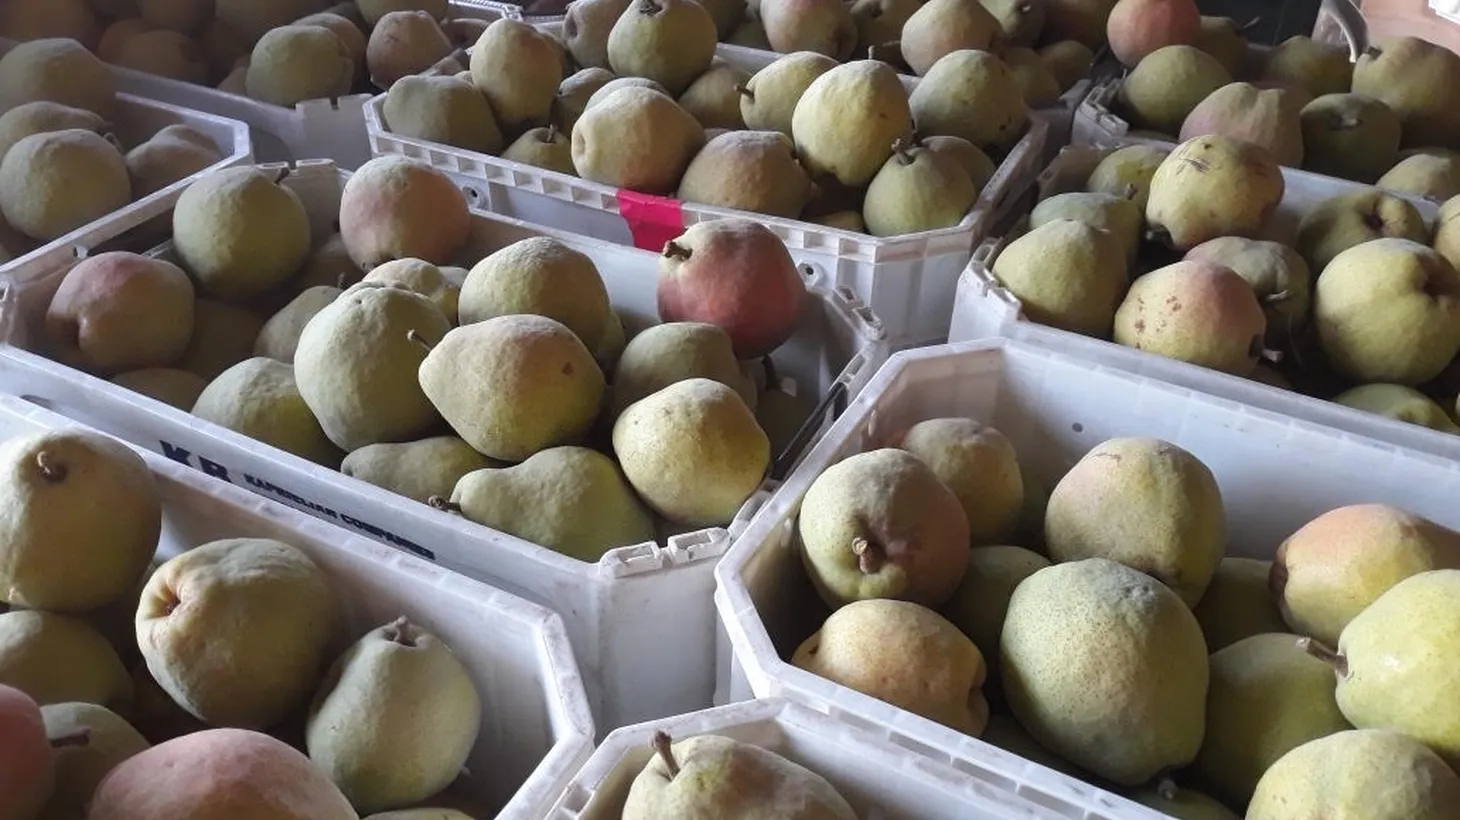 Becky Terry says European pears have to be cured in cold storage before they can be enjoyed.